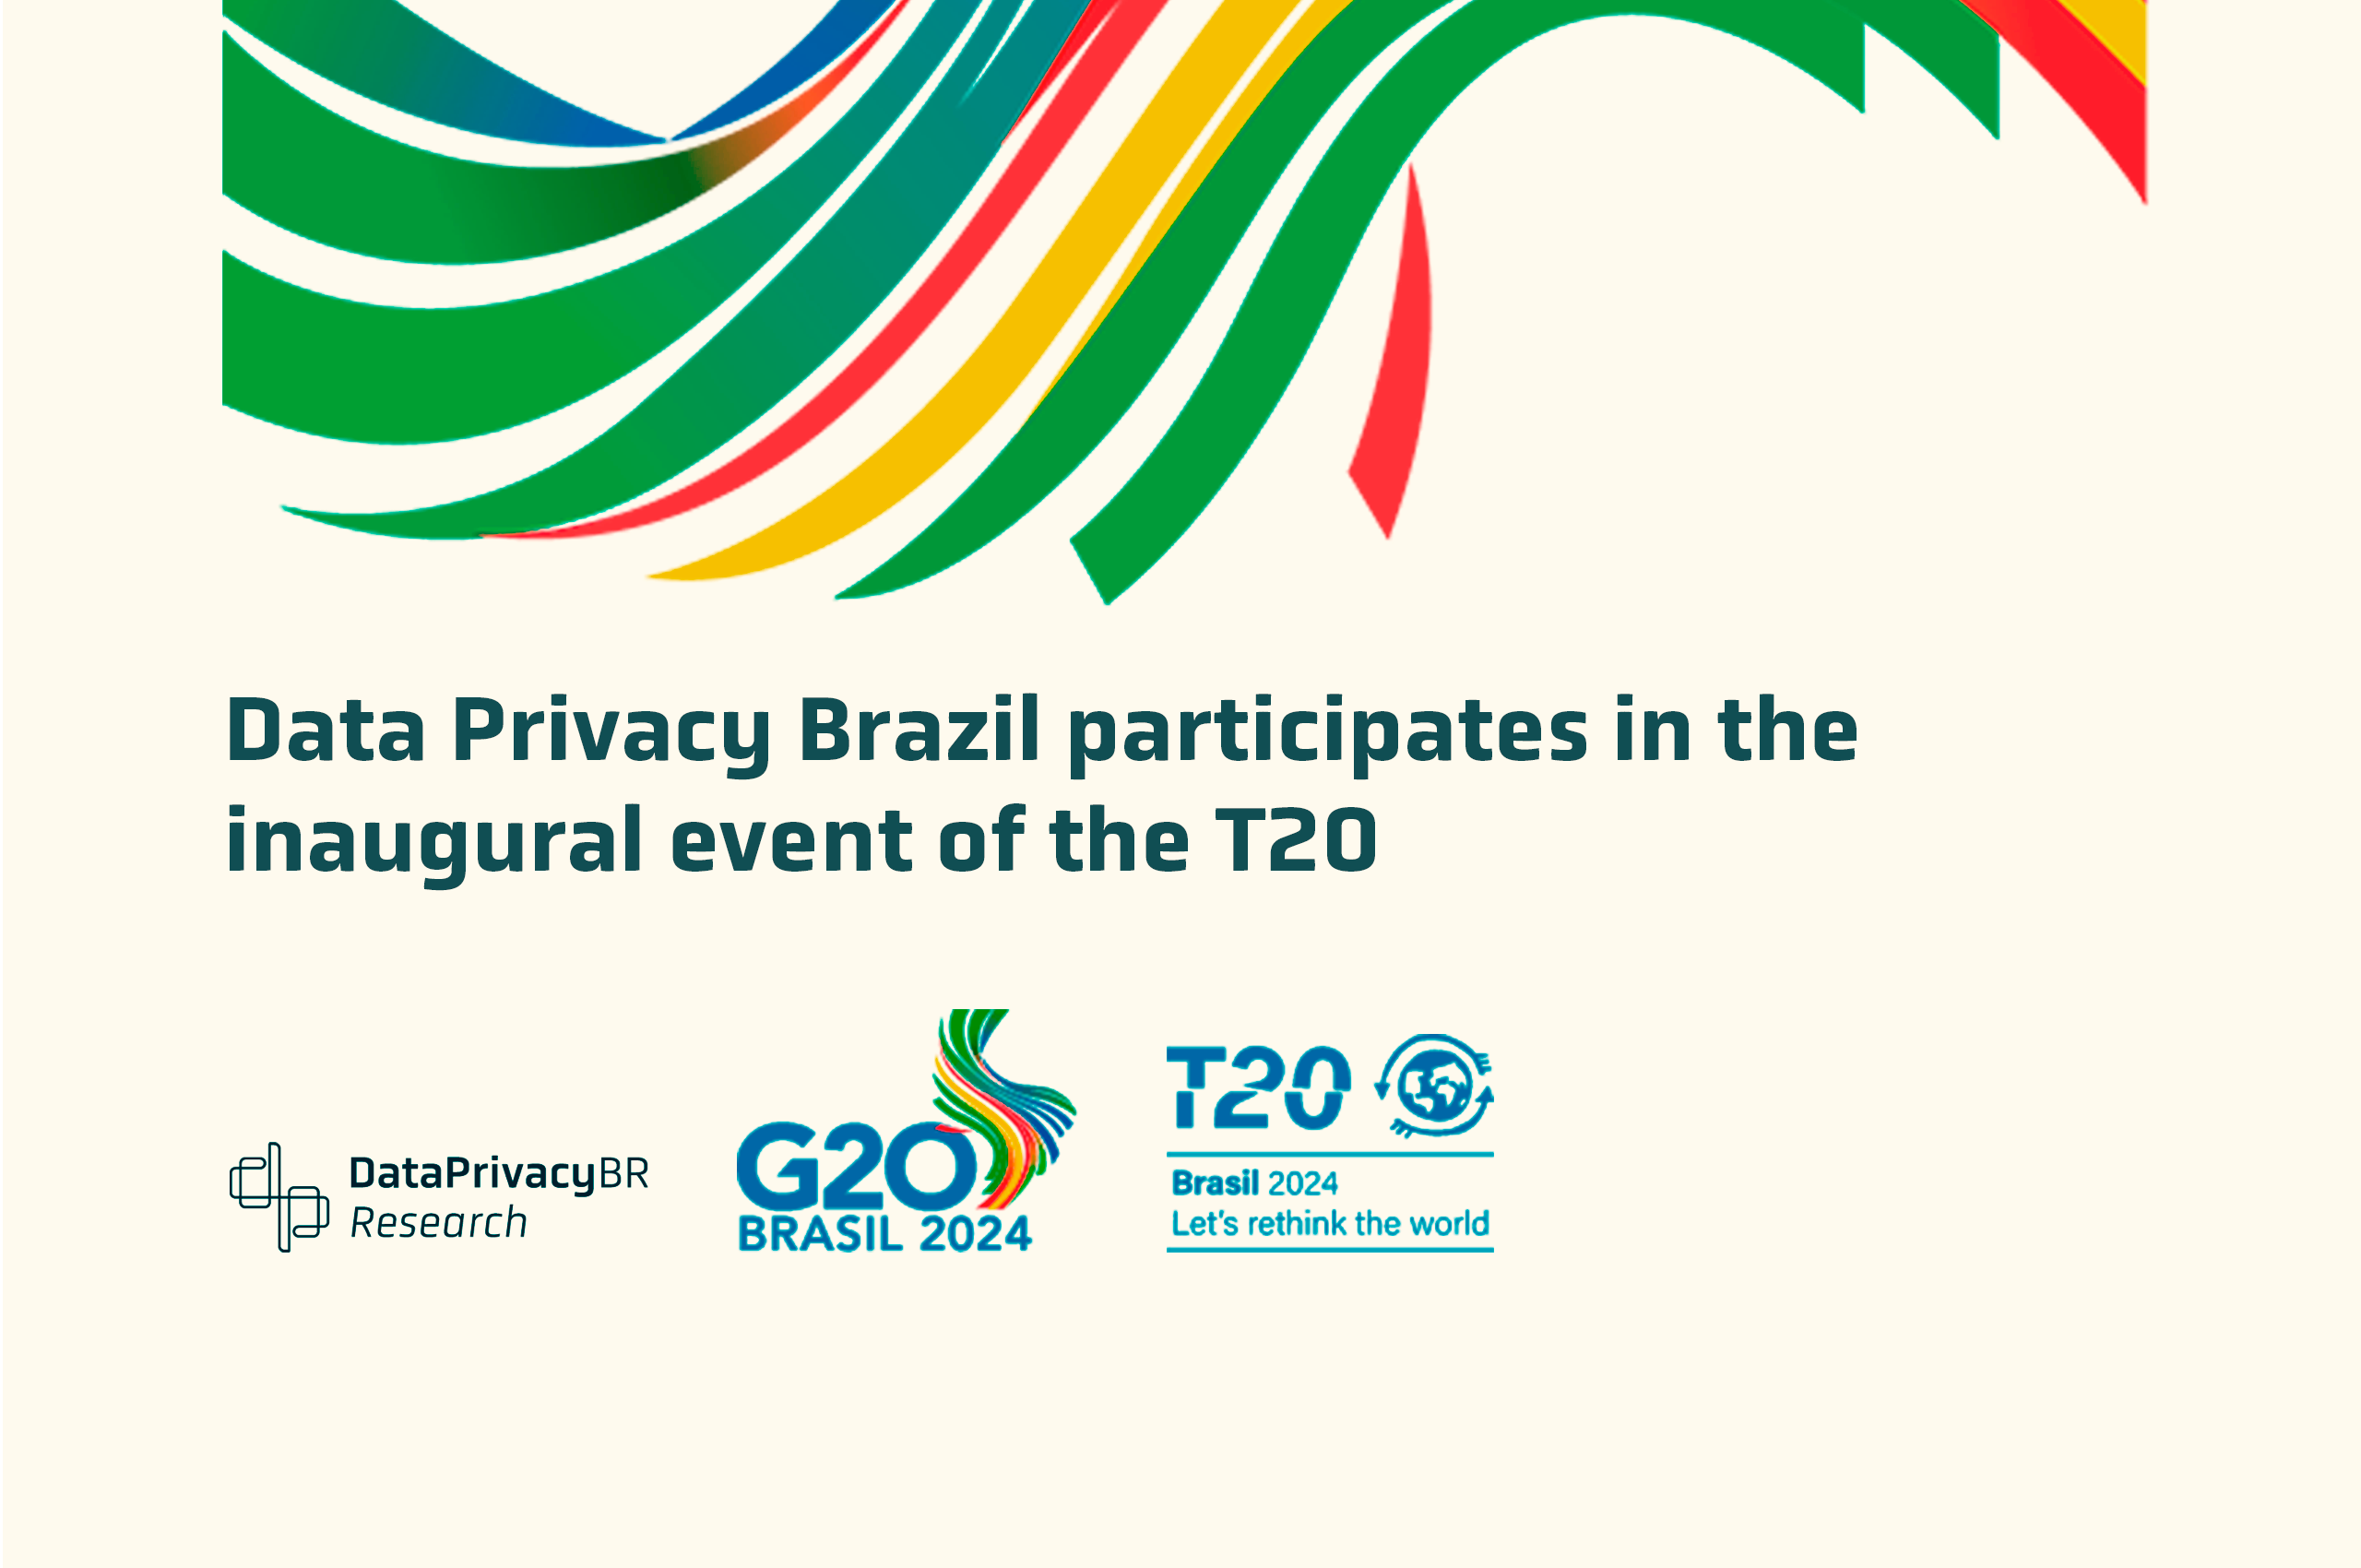 http://Data%20Privacy%20Brazil%20participates%20in%20the%20inaugural%20event%20of%20the%20T20